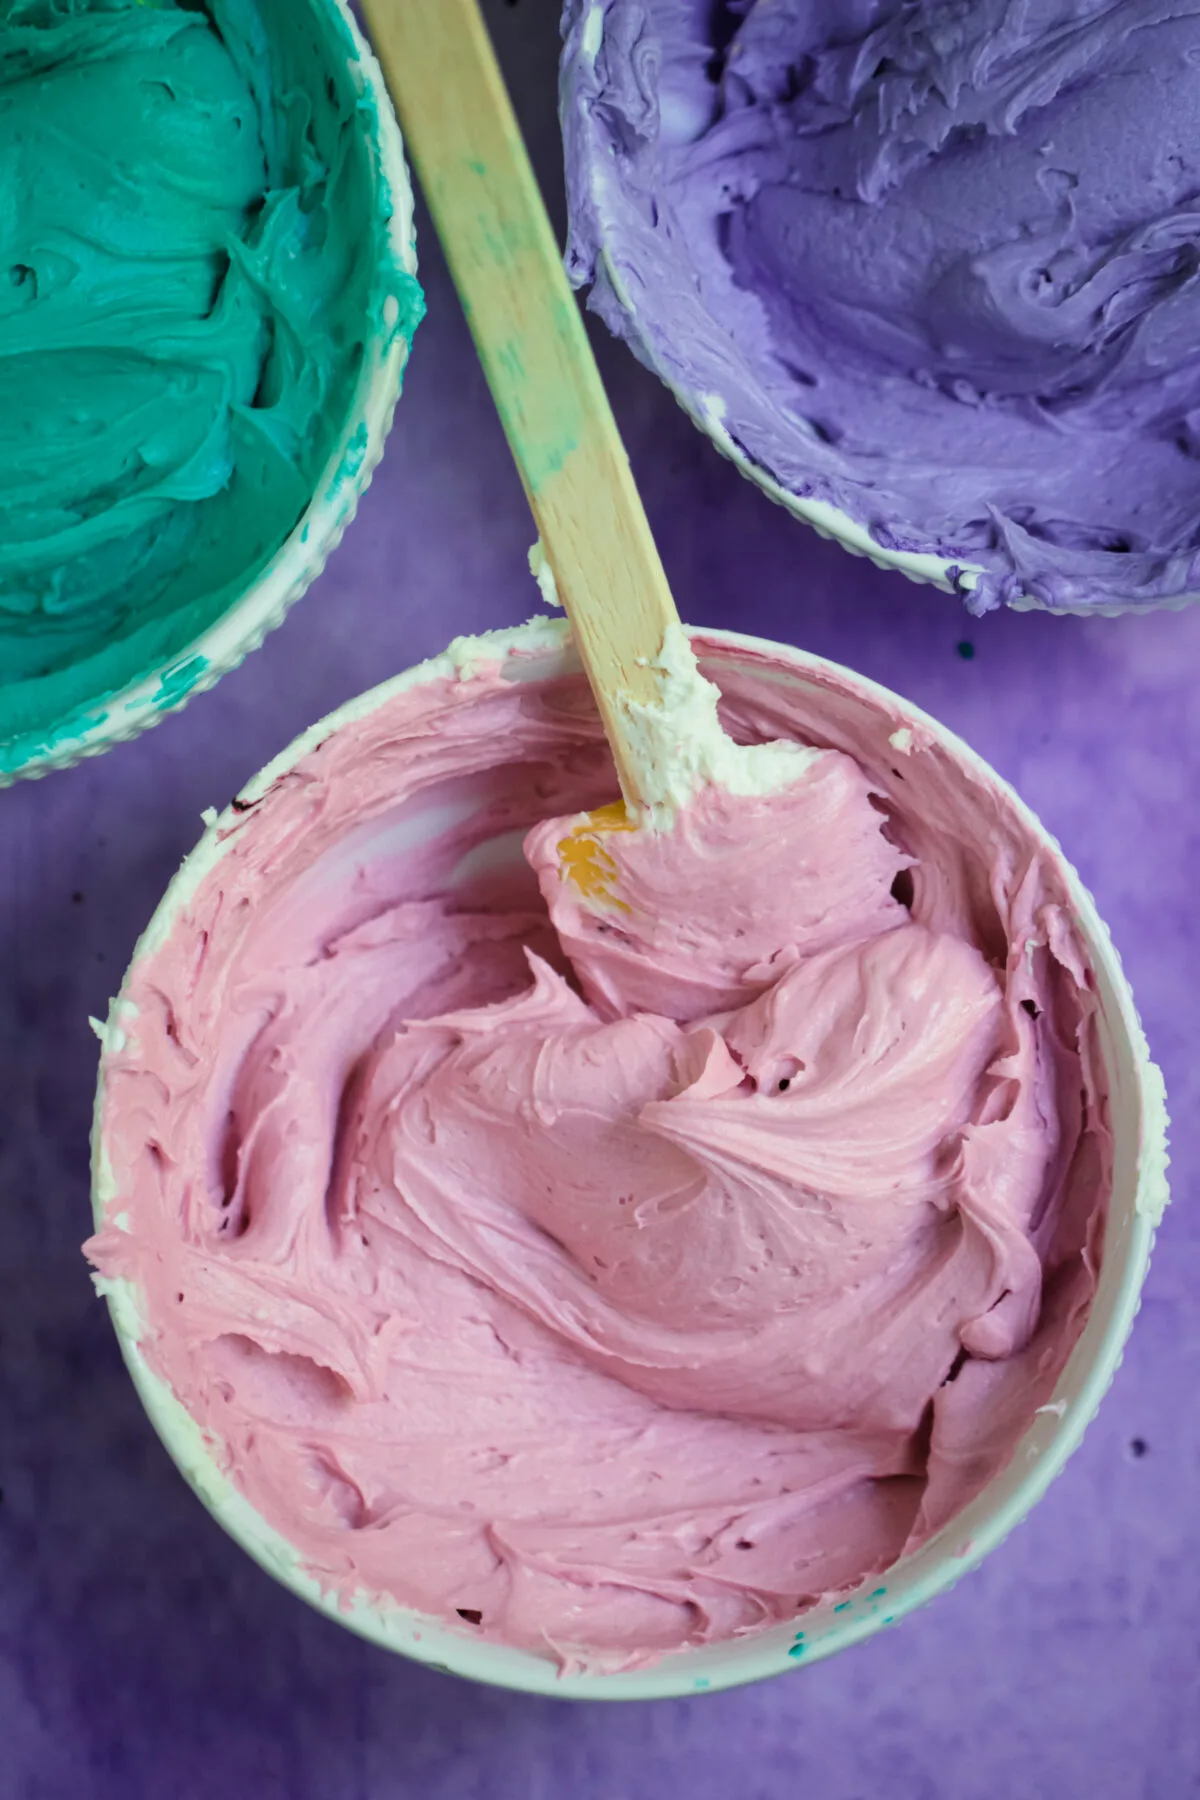 Colourful frosting in bowls.